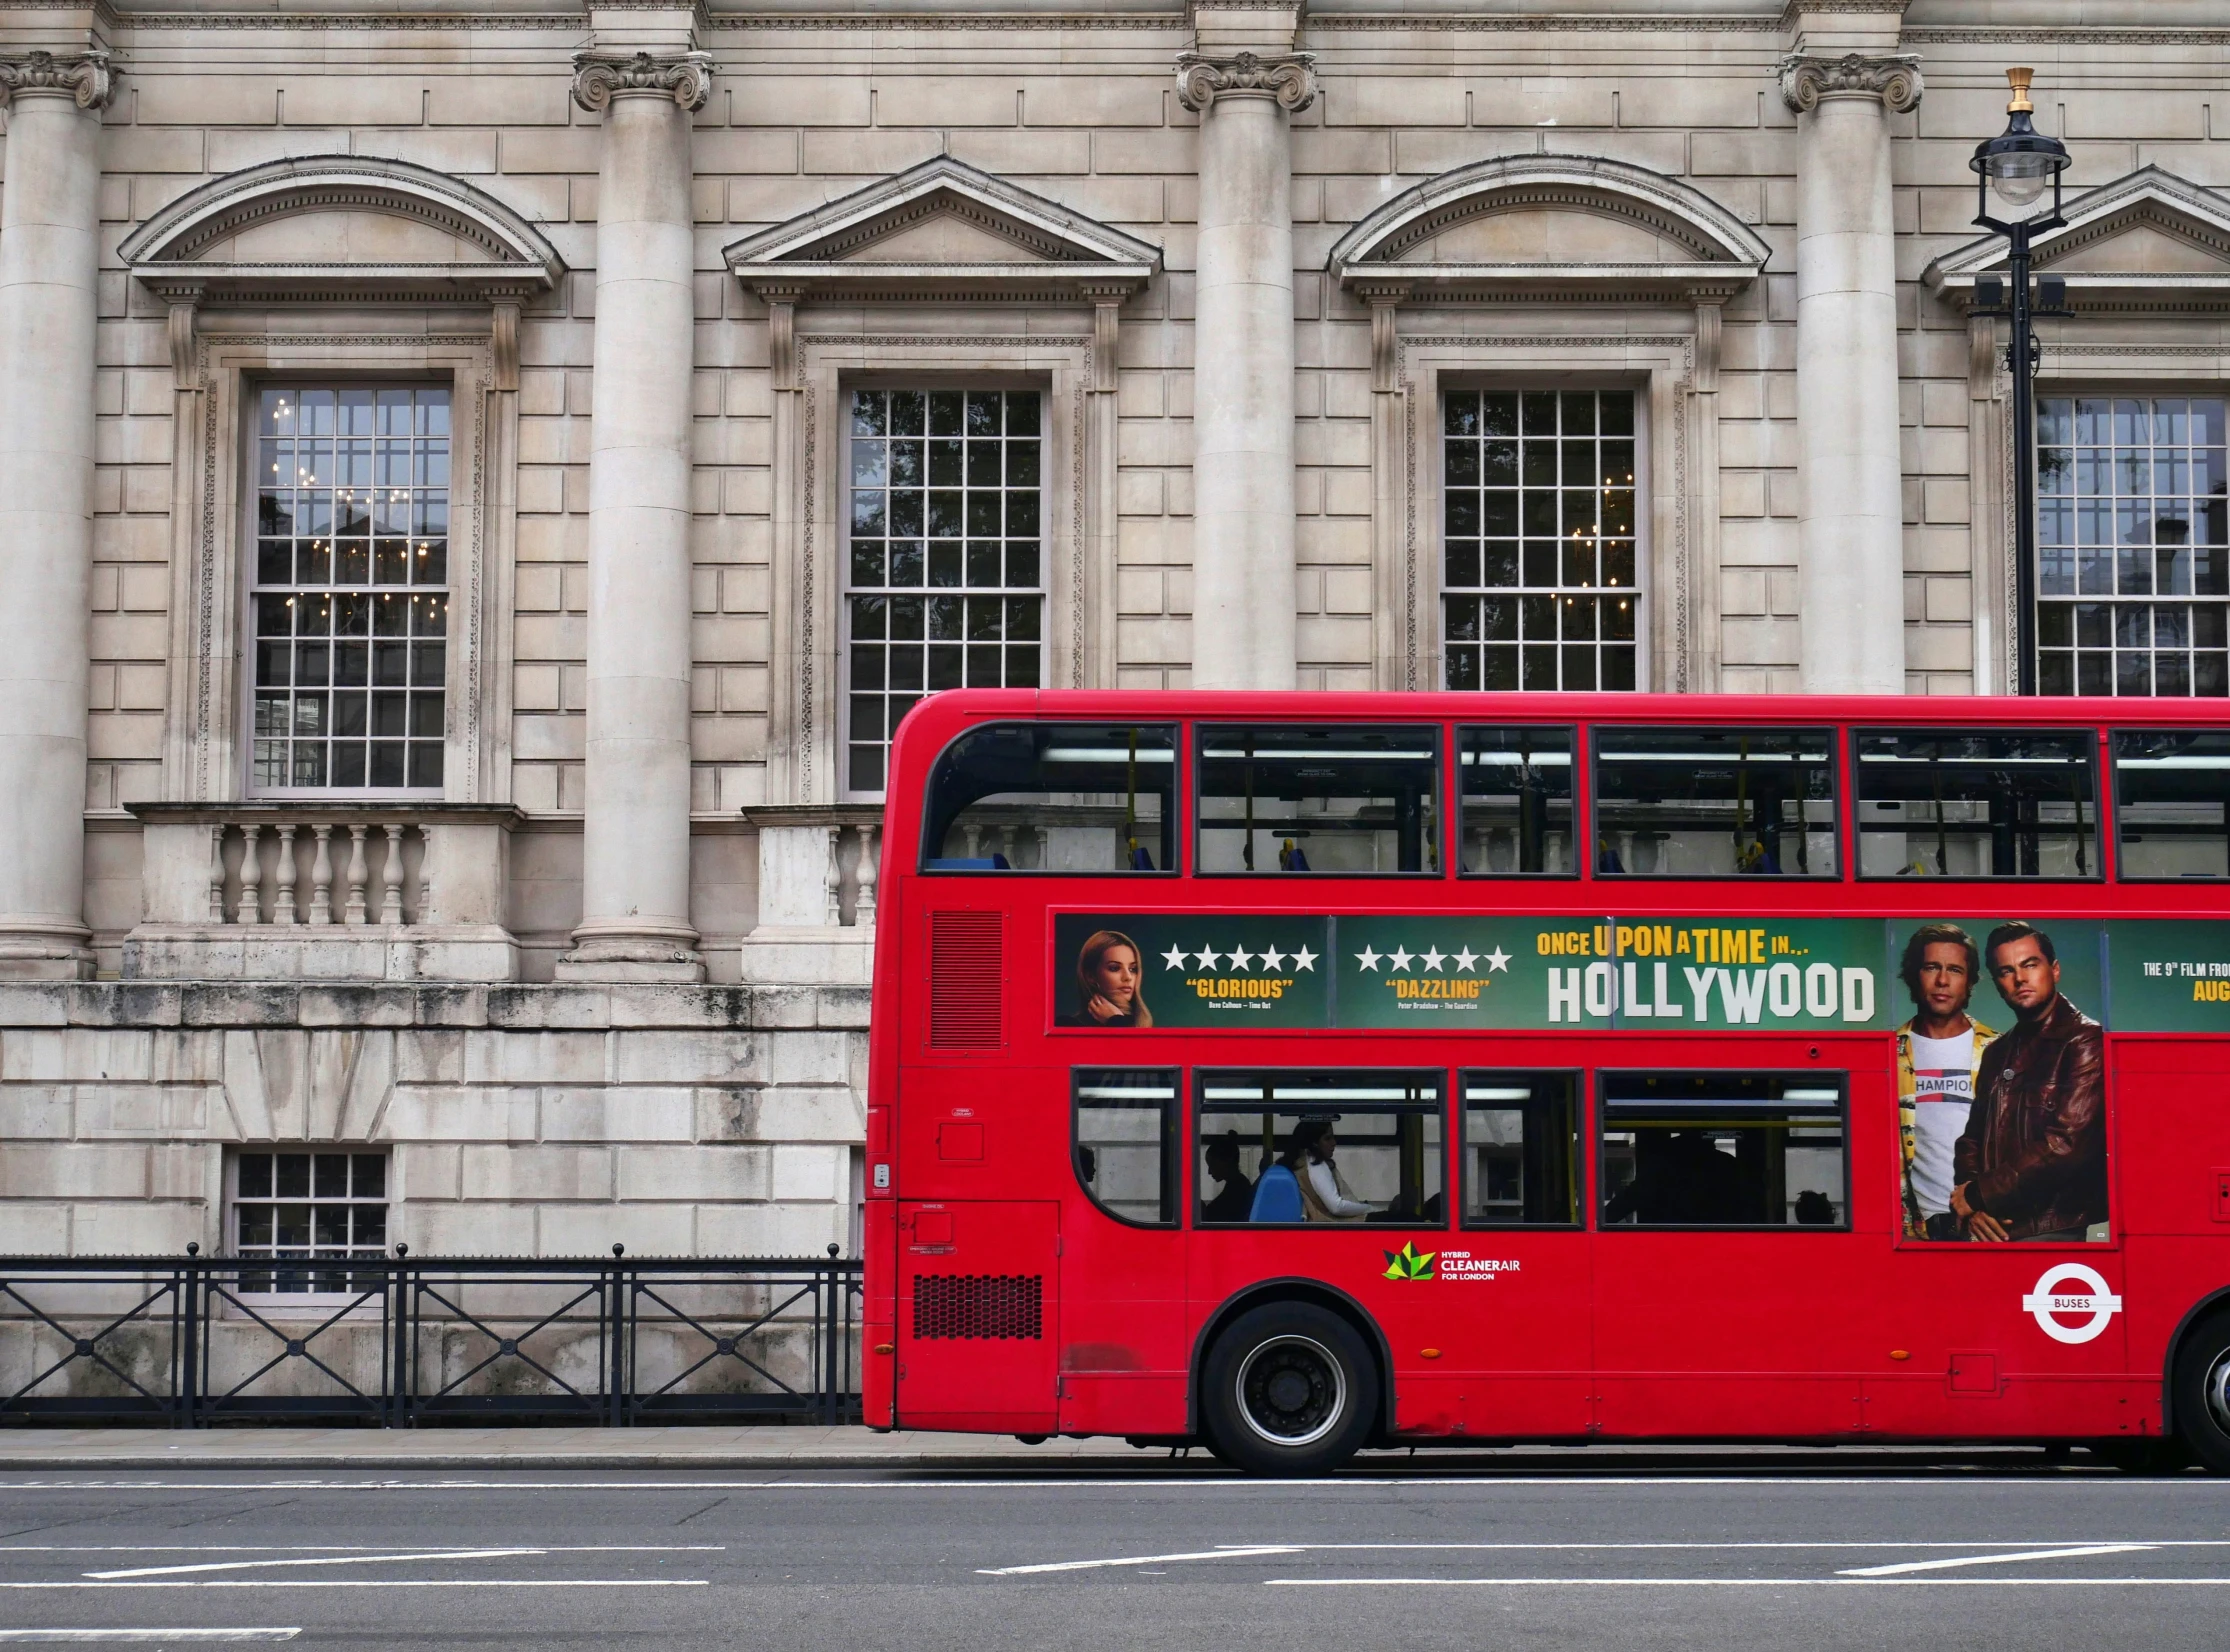 a large red double decker bus parked outside of a very old building